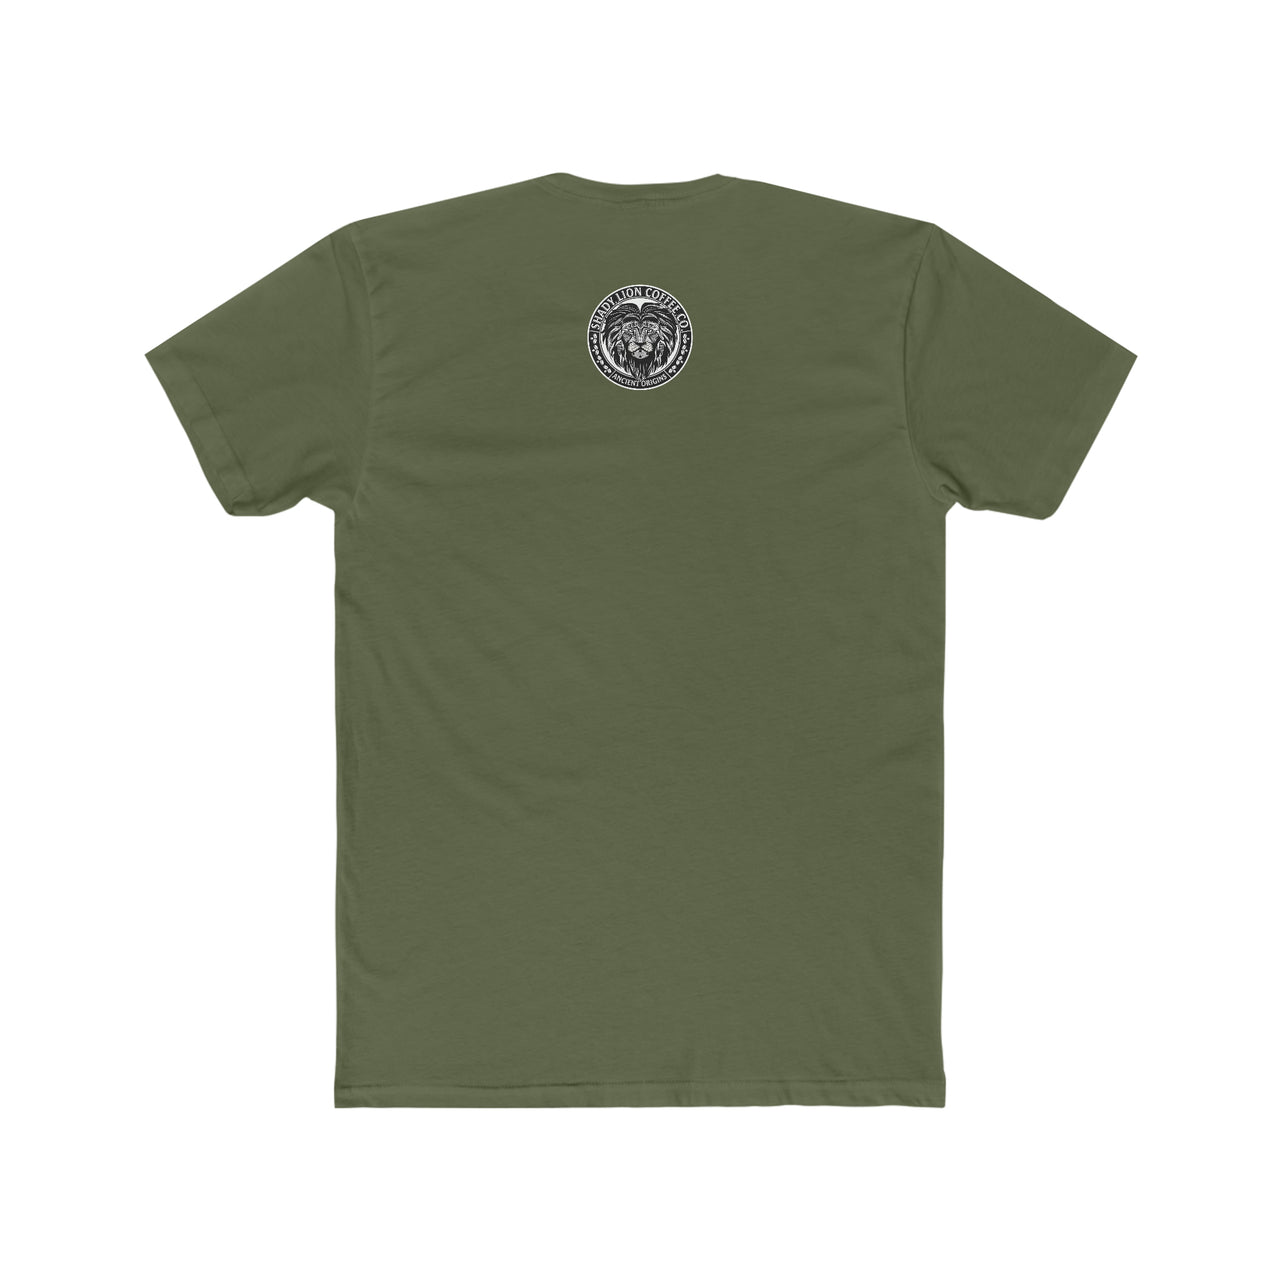 Mr. Cool Beans Unisex Cotton Crew Tee - Shady Lion Coffee Co.